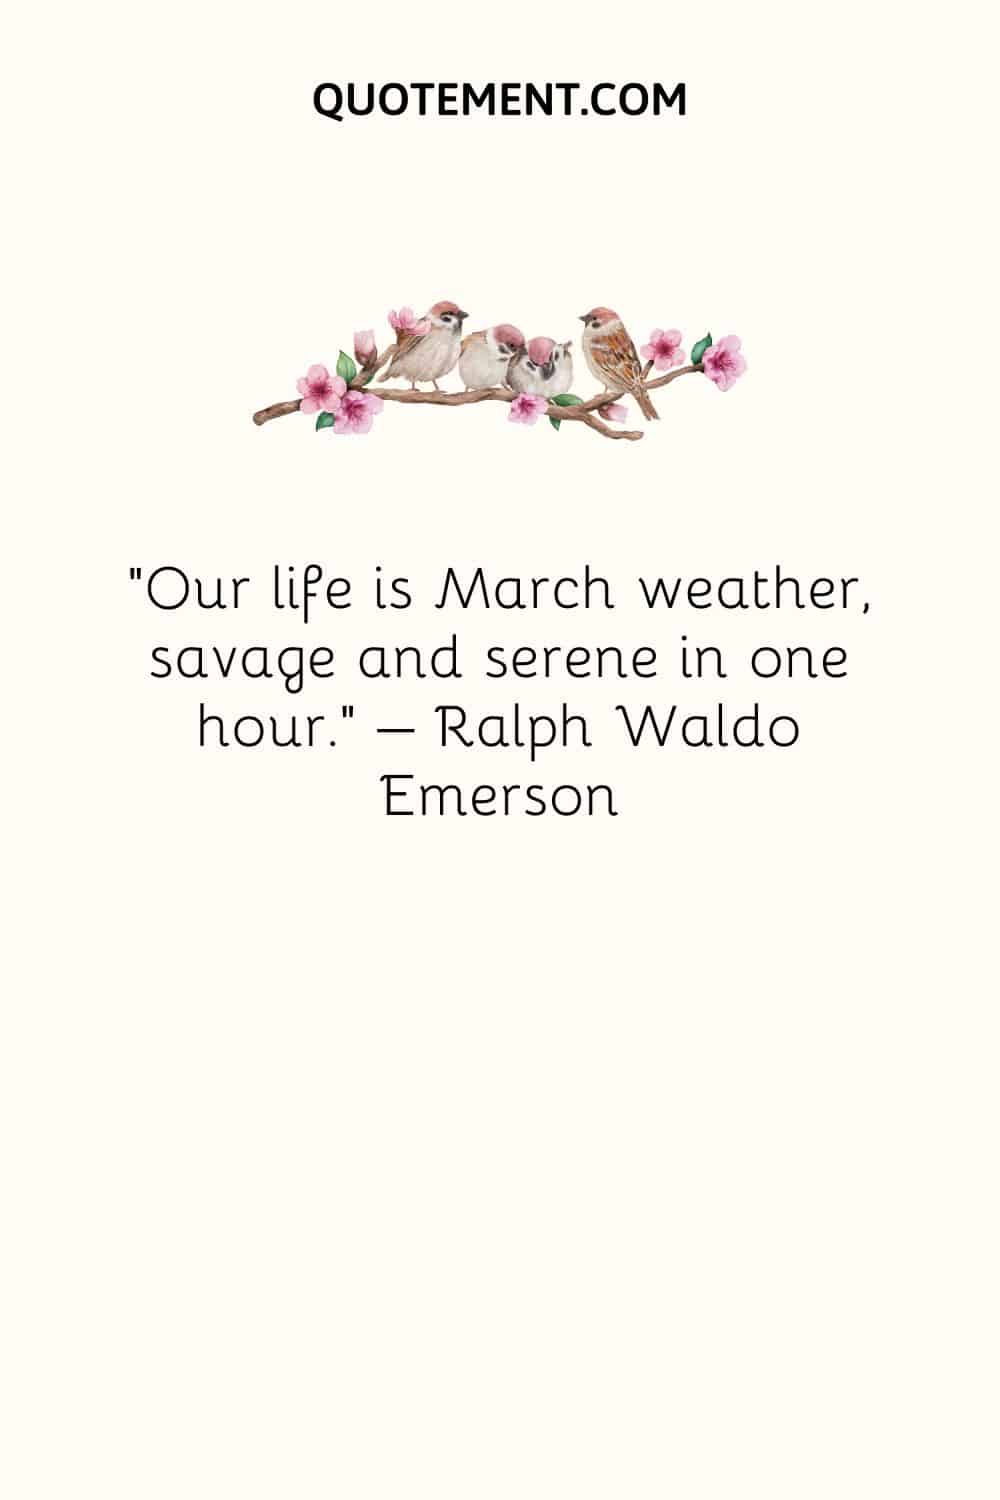 Our life is March weather, savage and serene in one hour. – Ralph Waldo Emerson